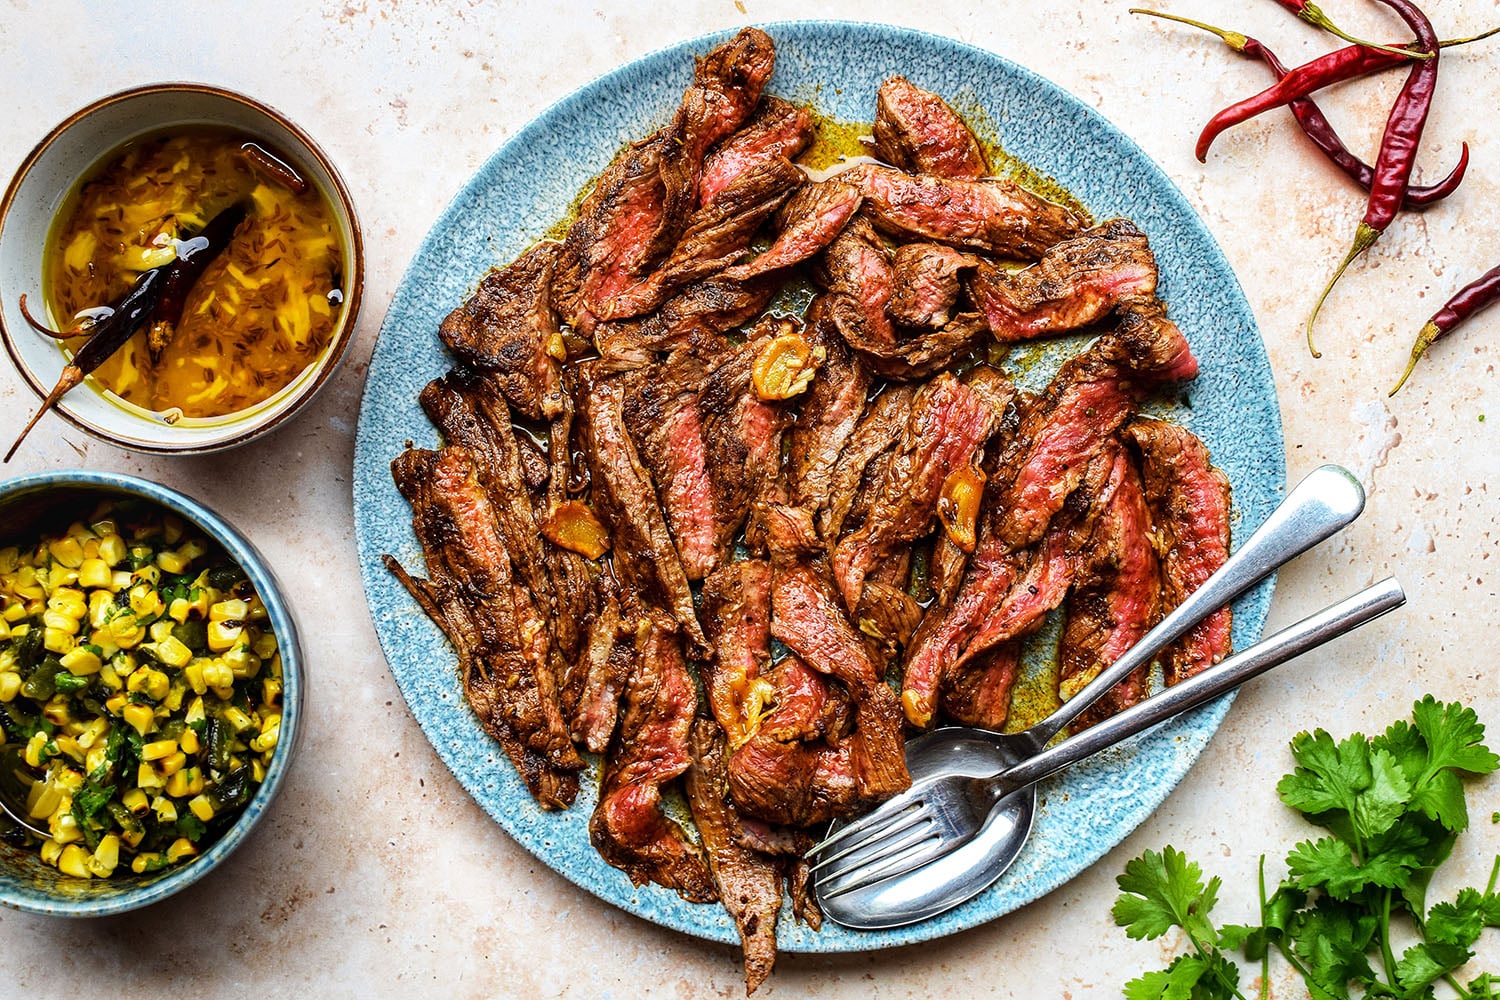 Barbecued steak with vibrant Mexican flavours